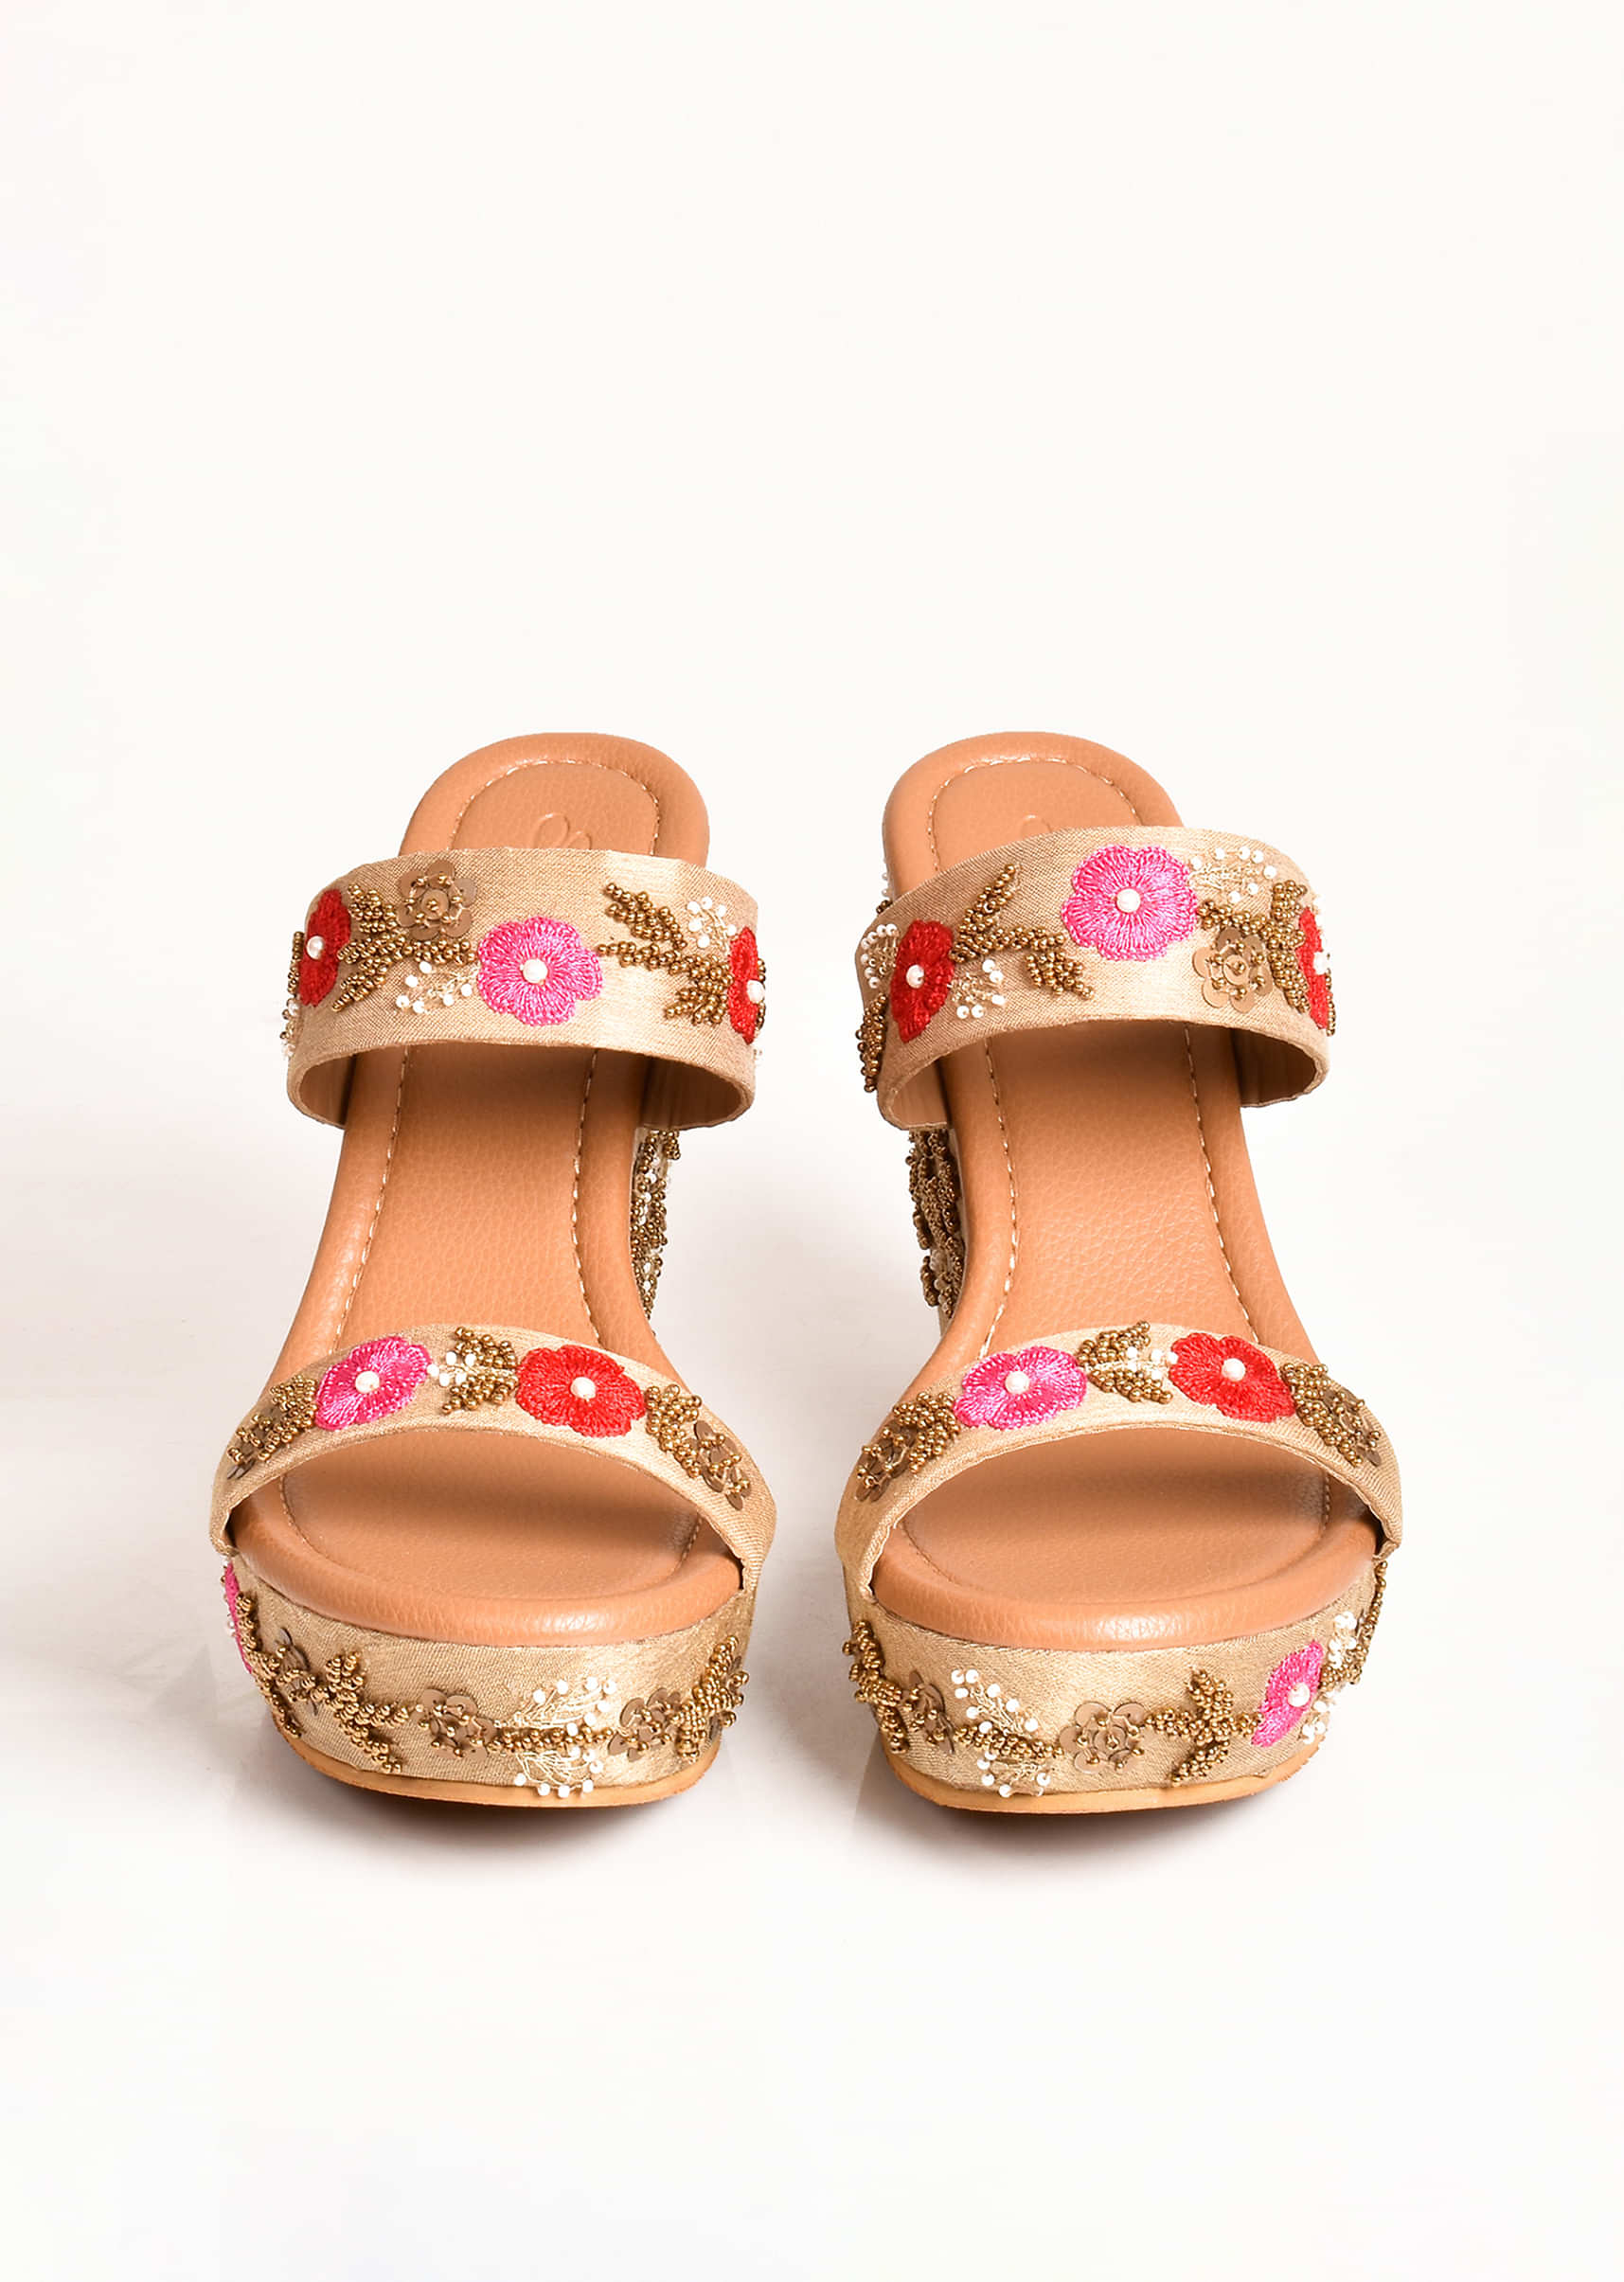 Nude Wedges In Silk With Red And Pink Resham Flowers Along With Gold Sequins Work By Sole House